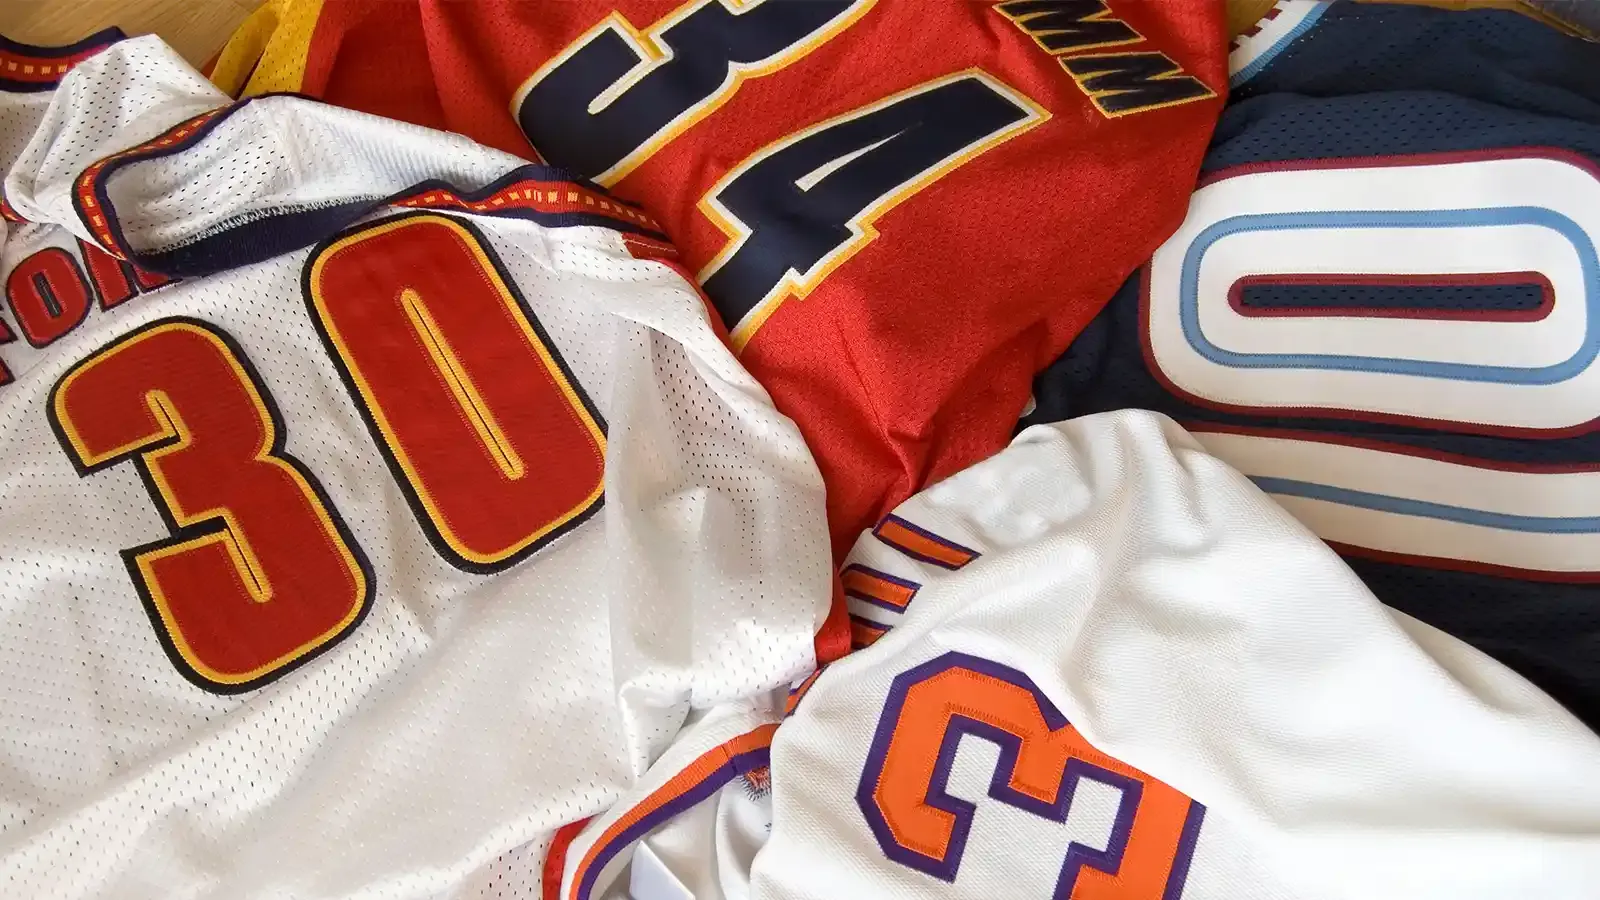 How to Iron on Letters to a Jersey: 3 Quick and Convenient Steps